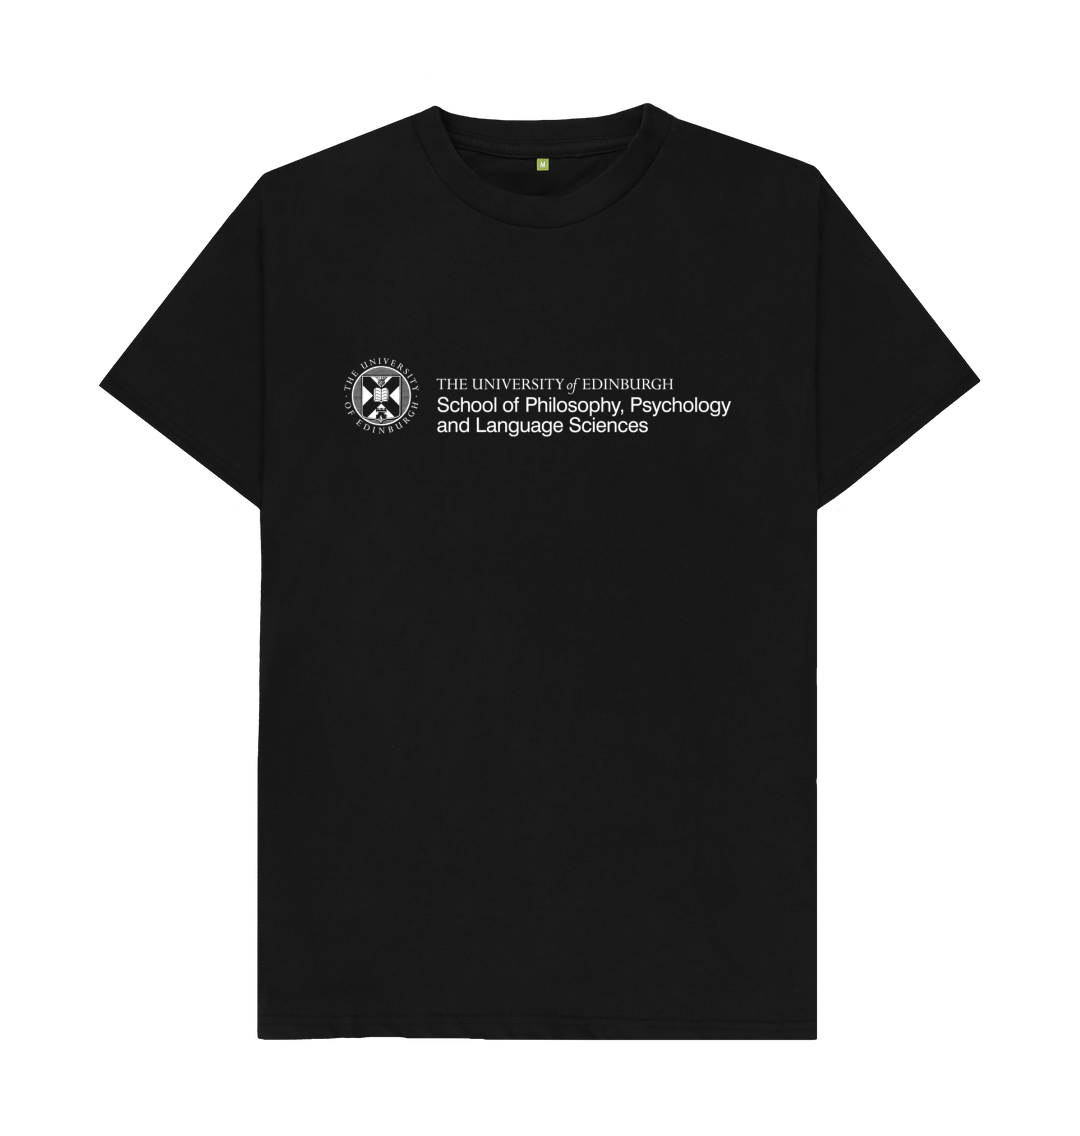 School of Philosophy, Psychology and Language Sciences T-Shirt